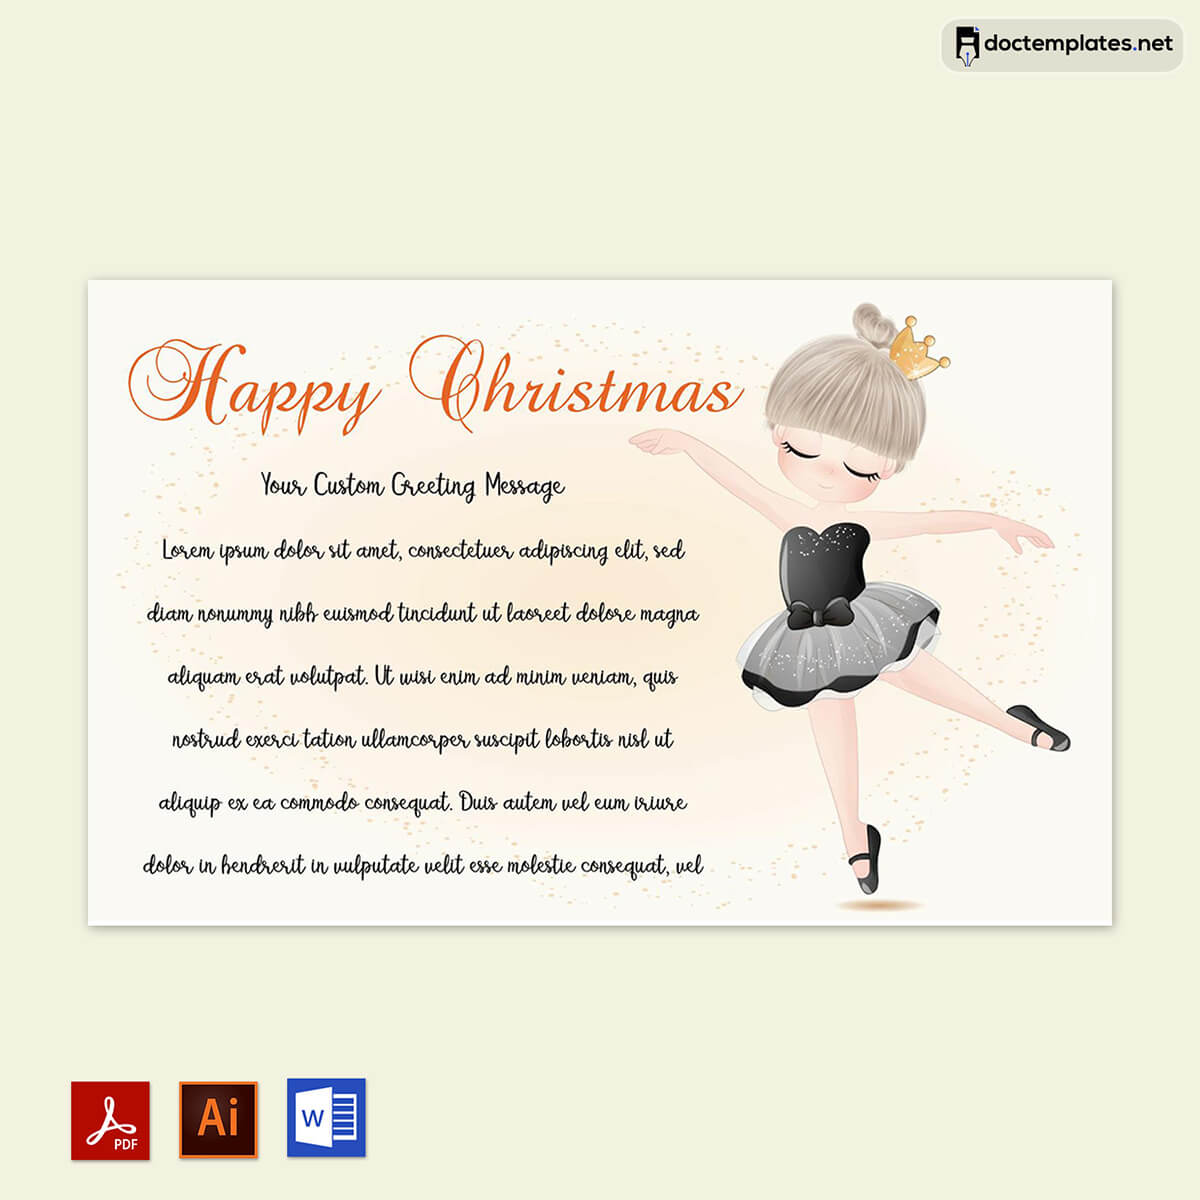 Image of Free Christmas gift certificate template
Free Christmas gift certificate template
